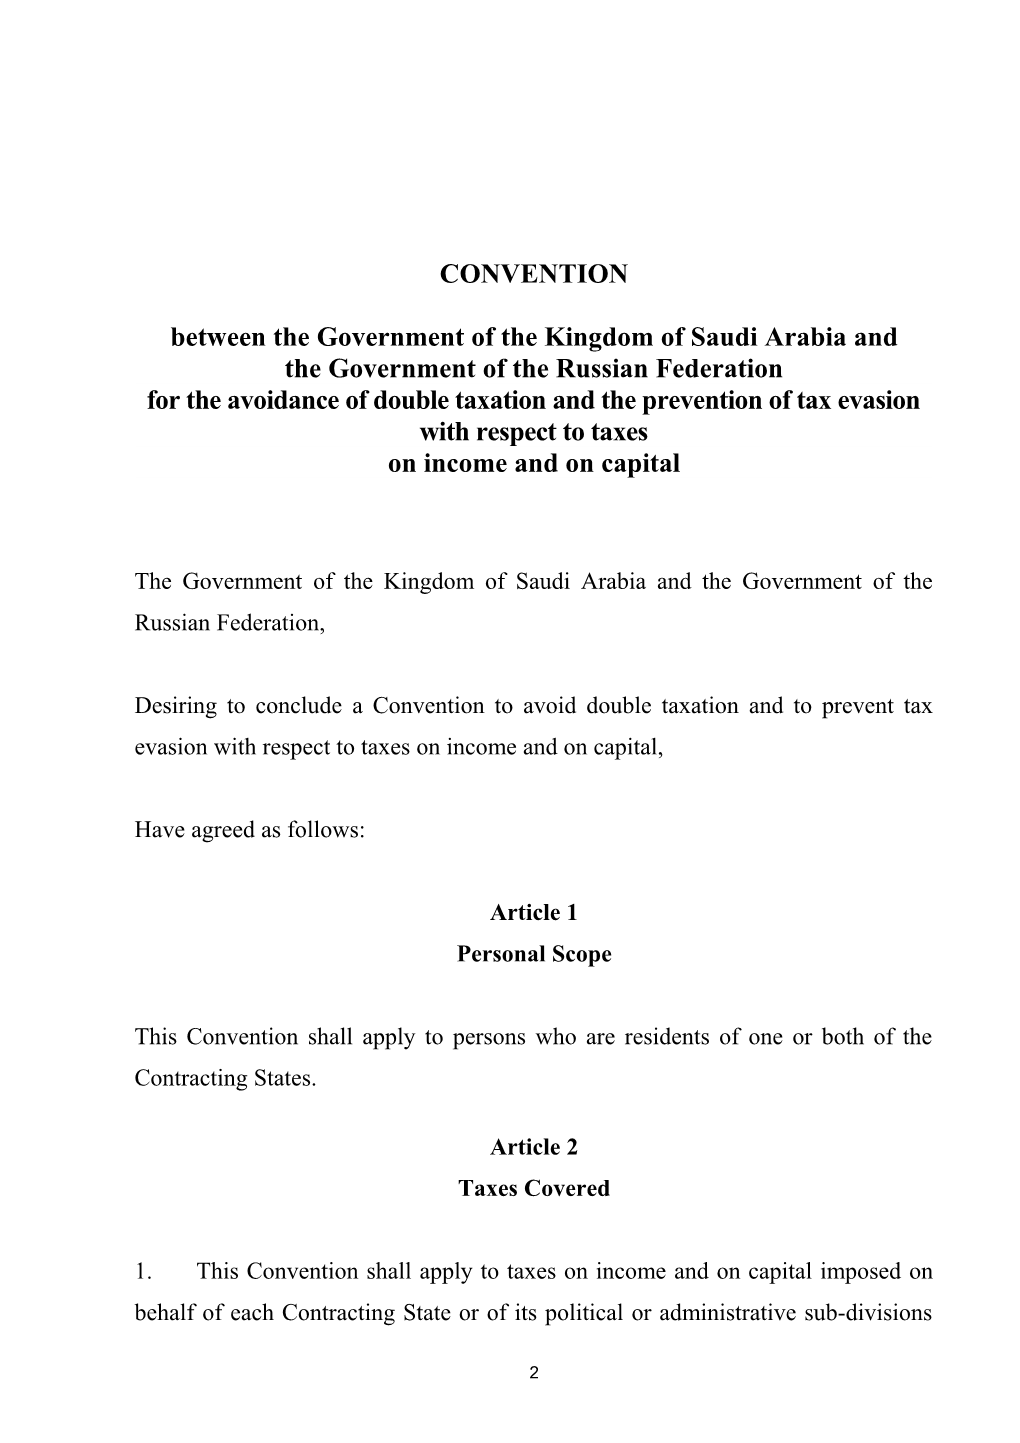 Agreement Between the Kingdom of Saudi Arabia and Russia for the Avoidance of Double Taxation